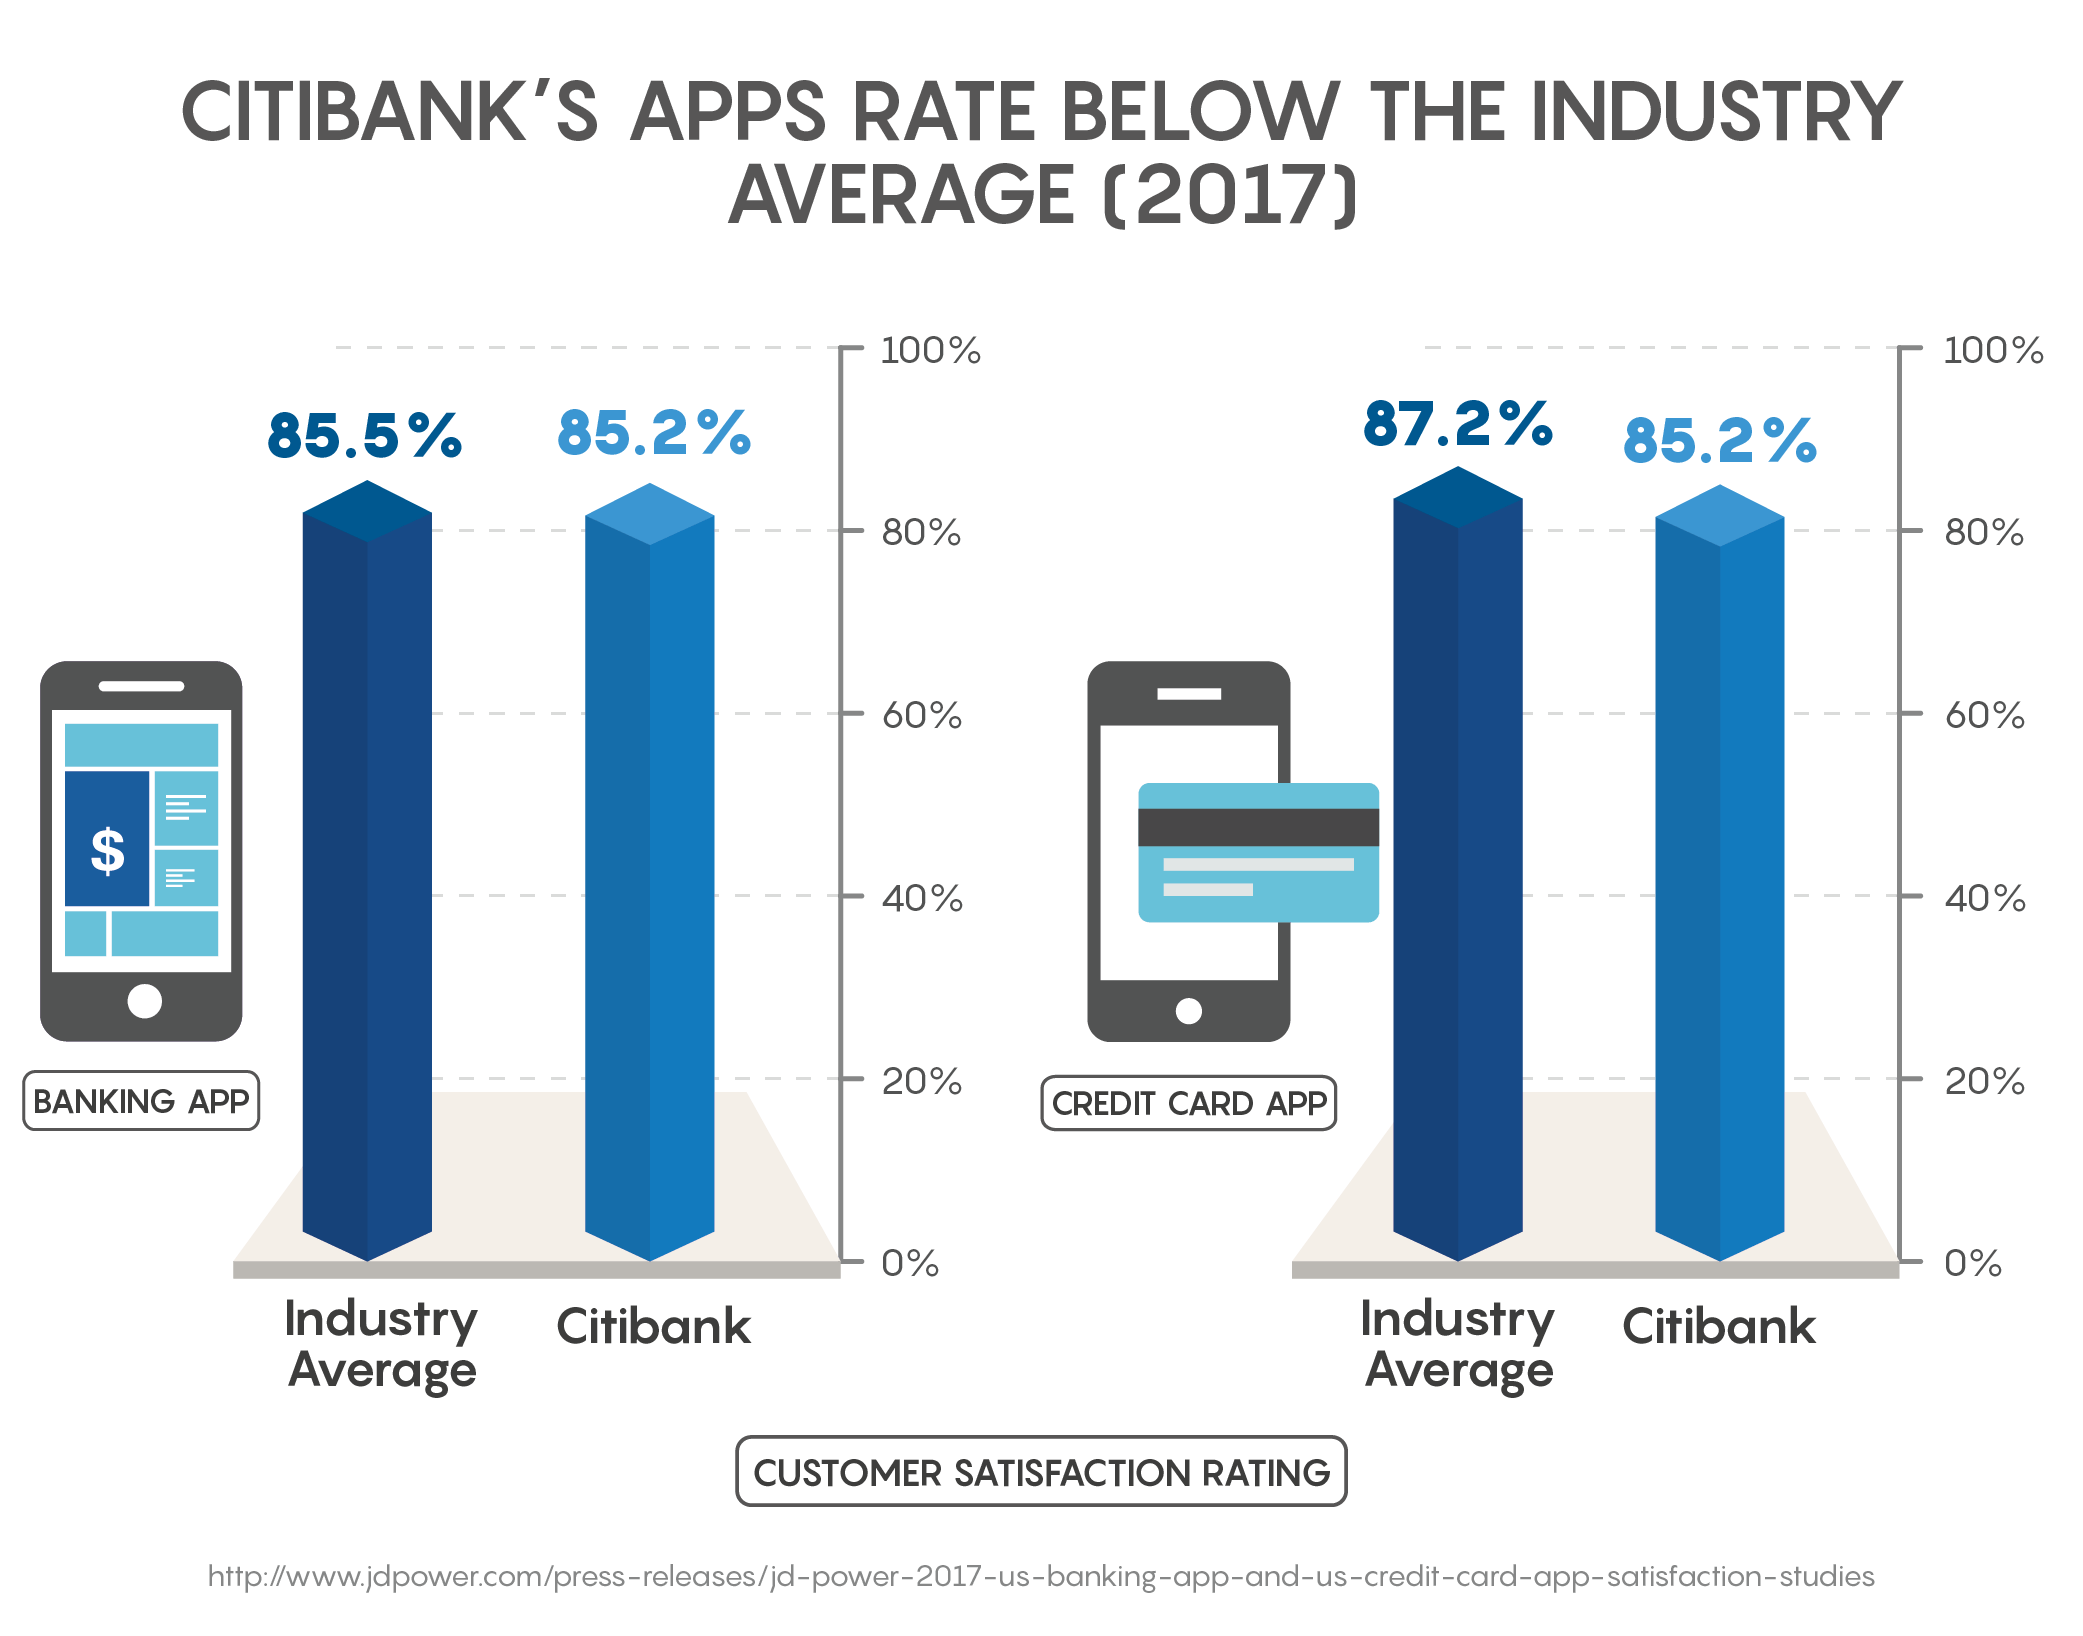 Citibank's Apps Rate Below the Industry Average (2017)